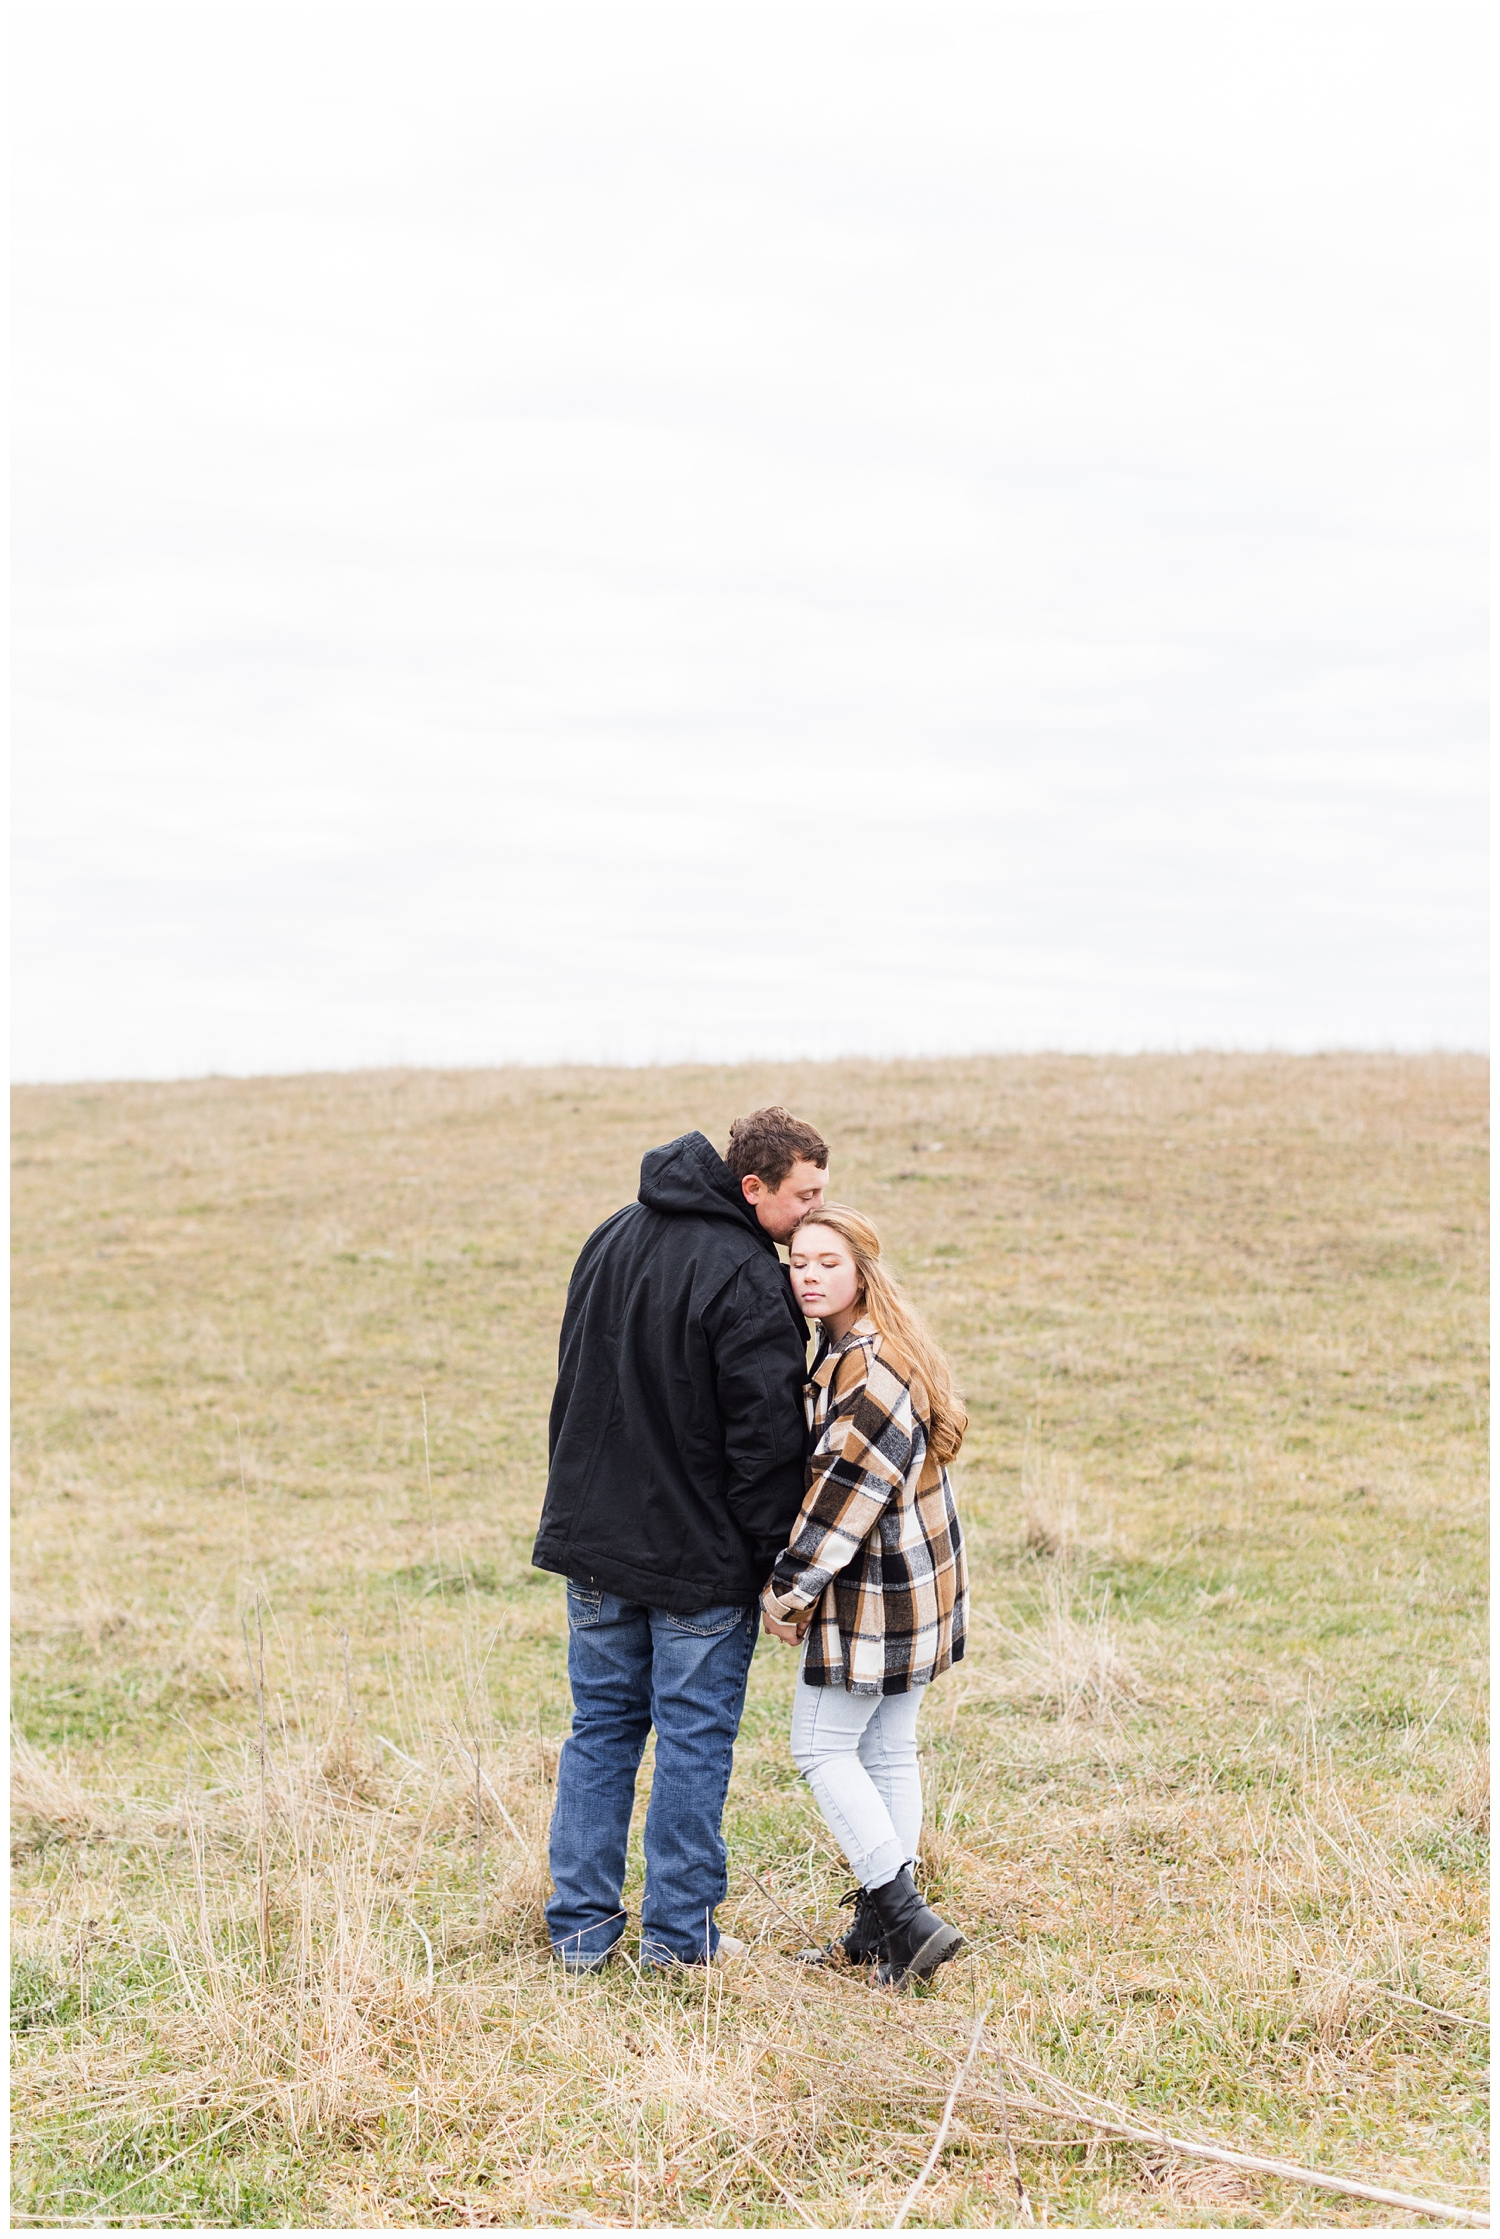 Abi leans on Travis's shoulder on a grassy hill in Iowa in the middle of winter | CB Studio